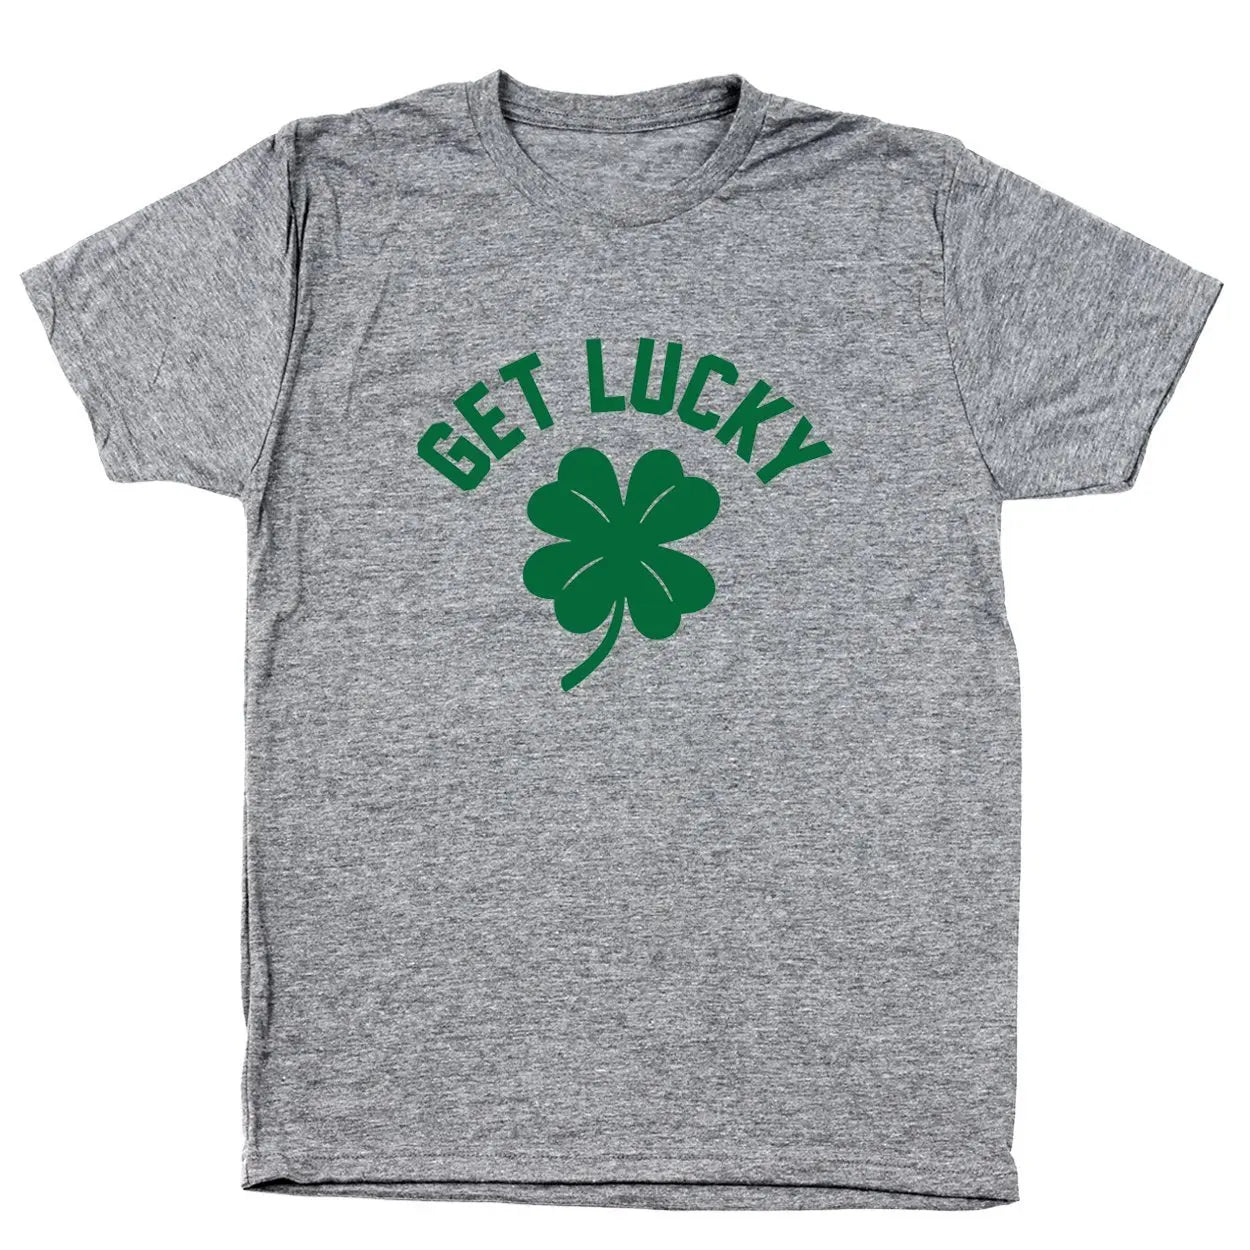 Get Lucky Clover Tshirt - Donkey Tees